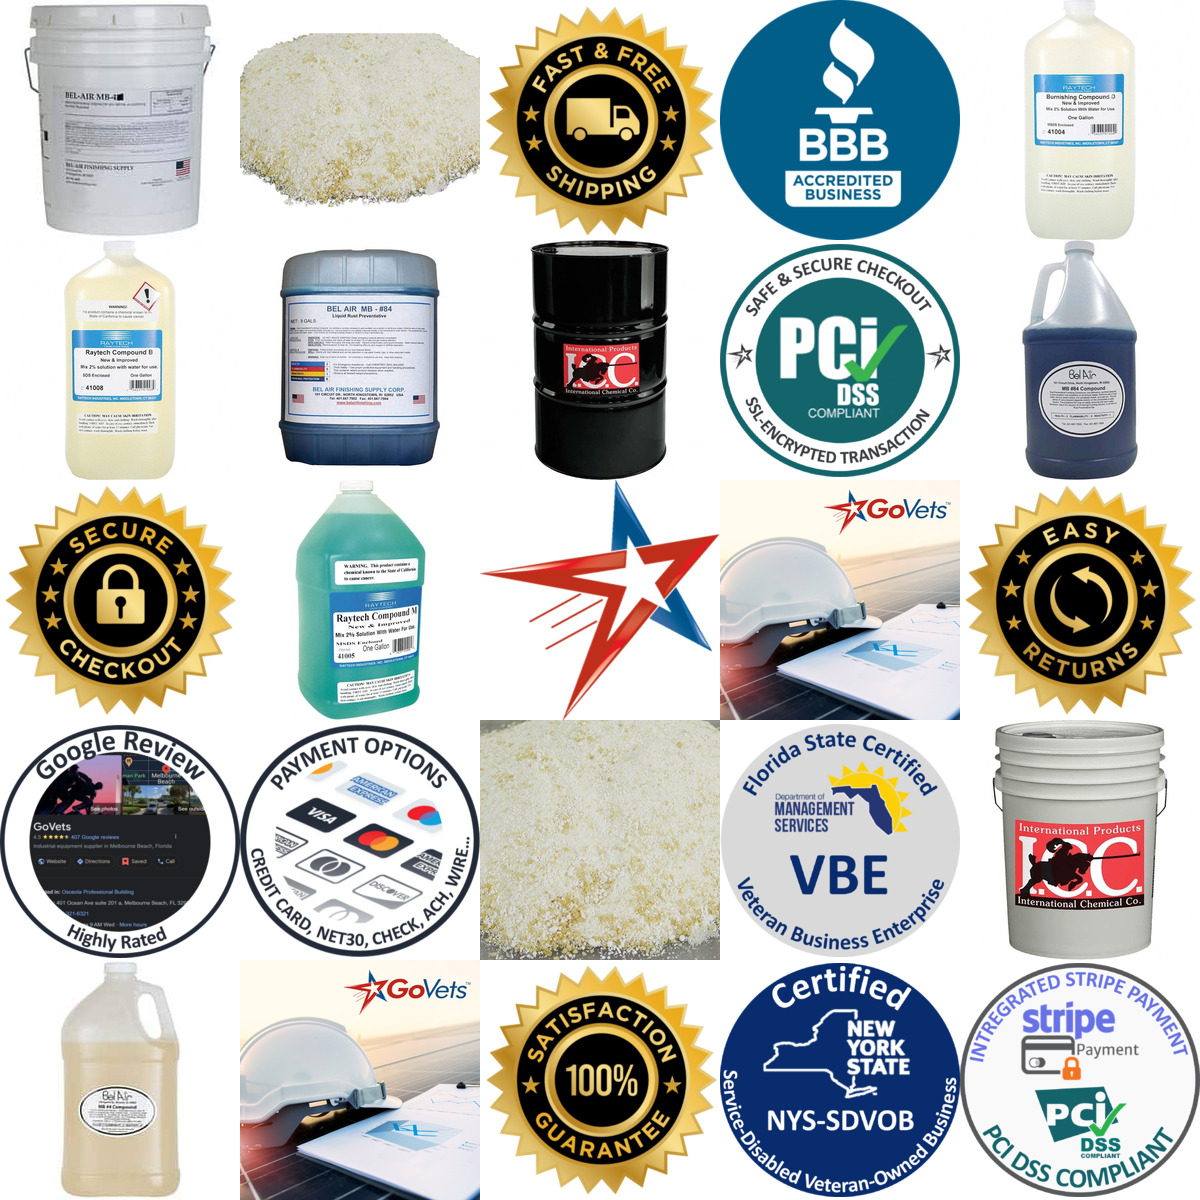 A selection of Tumbling Media Additives products on GoVets